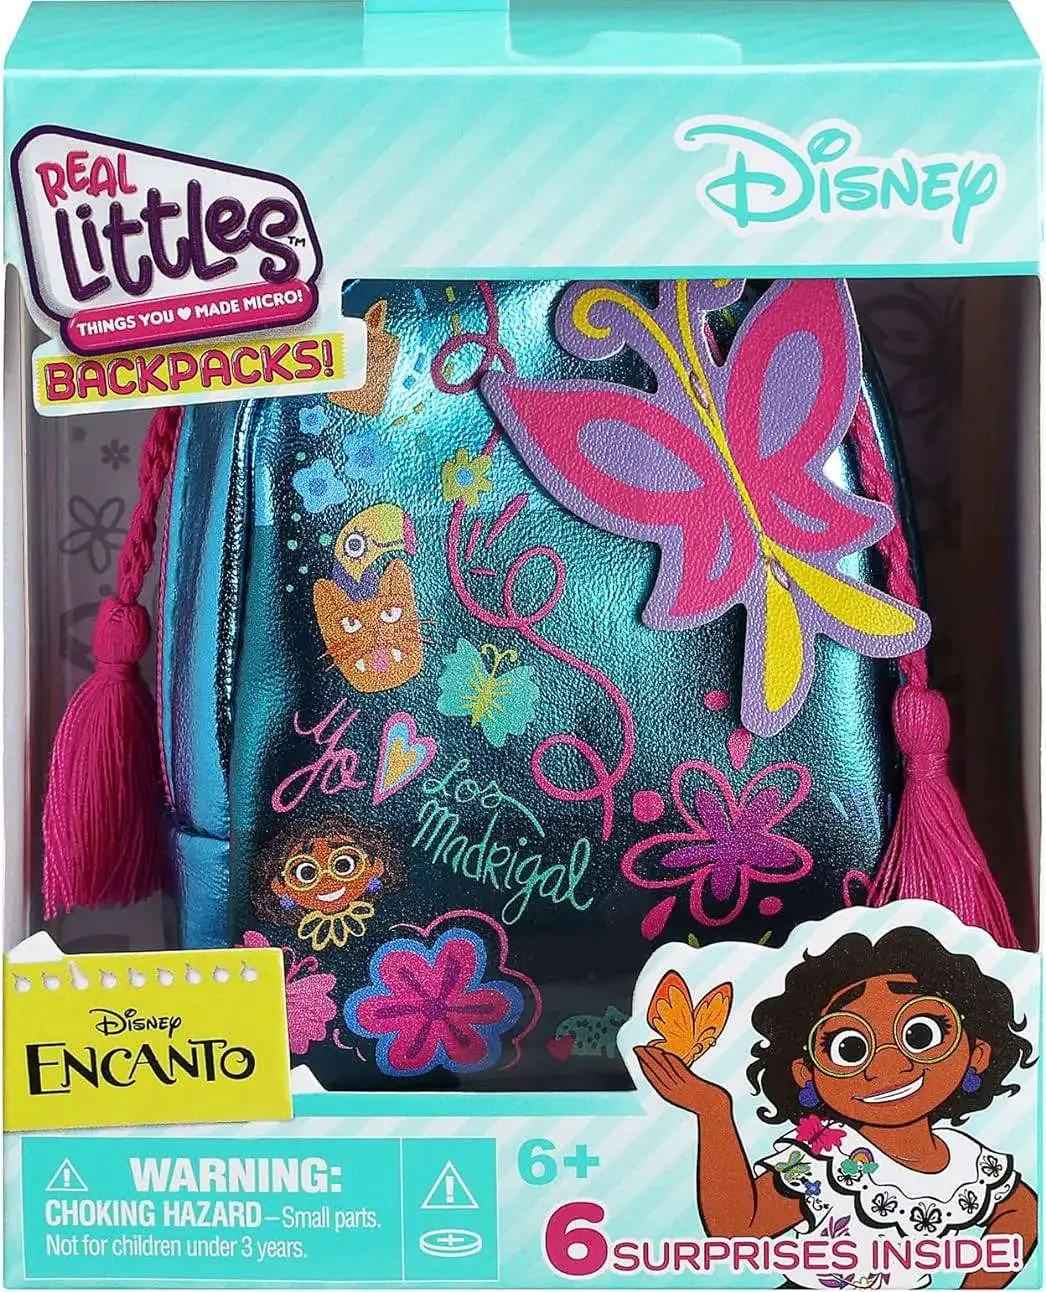  REAL LITTLES Disney Collectible Micro Journal With